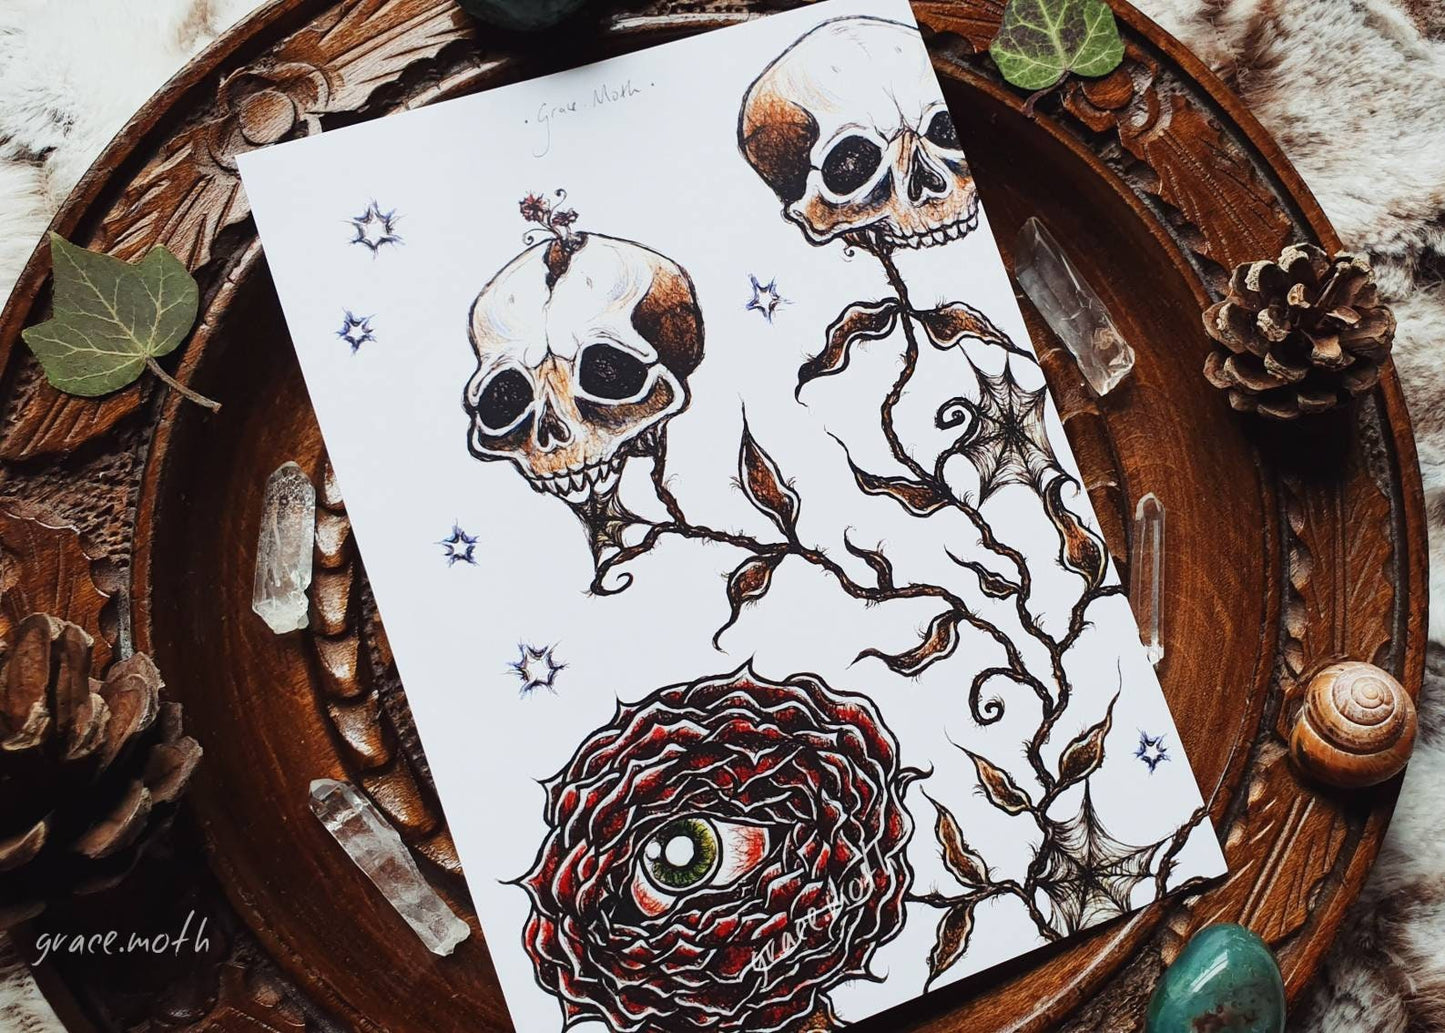 Skull and Rose Corner - A6 print by Grace Moth - 5.8 x 4.1